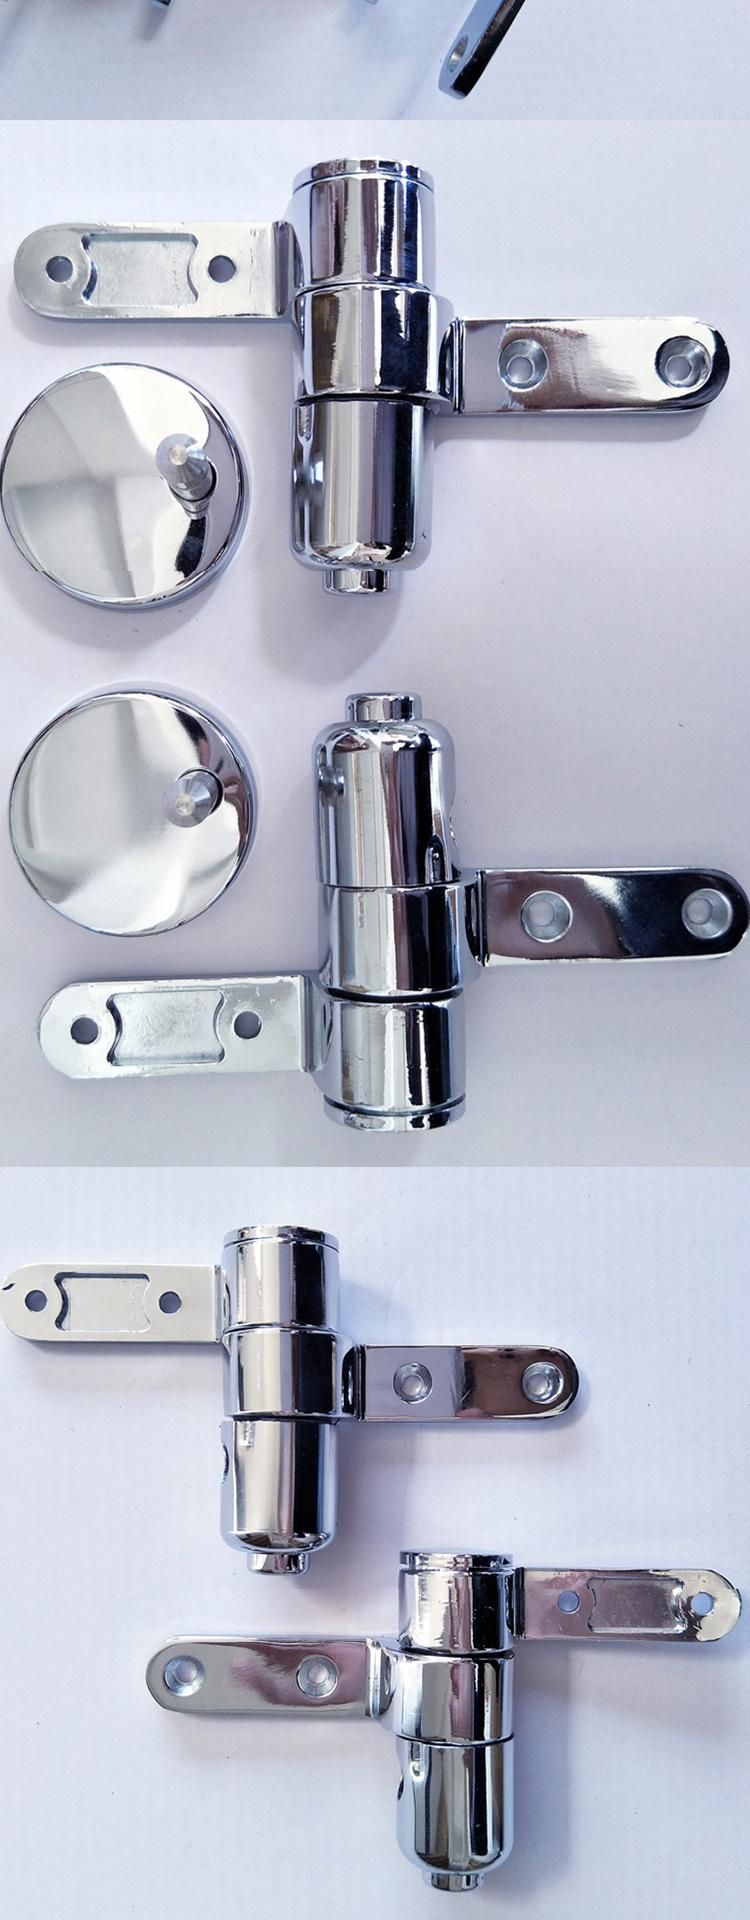 High Quality Stainless Steel Soft Close Toilet Seat Hinge